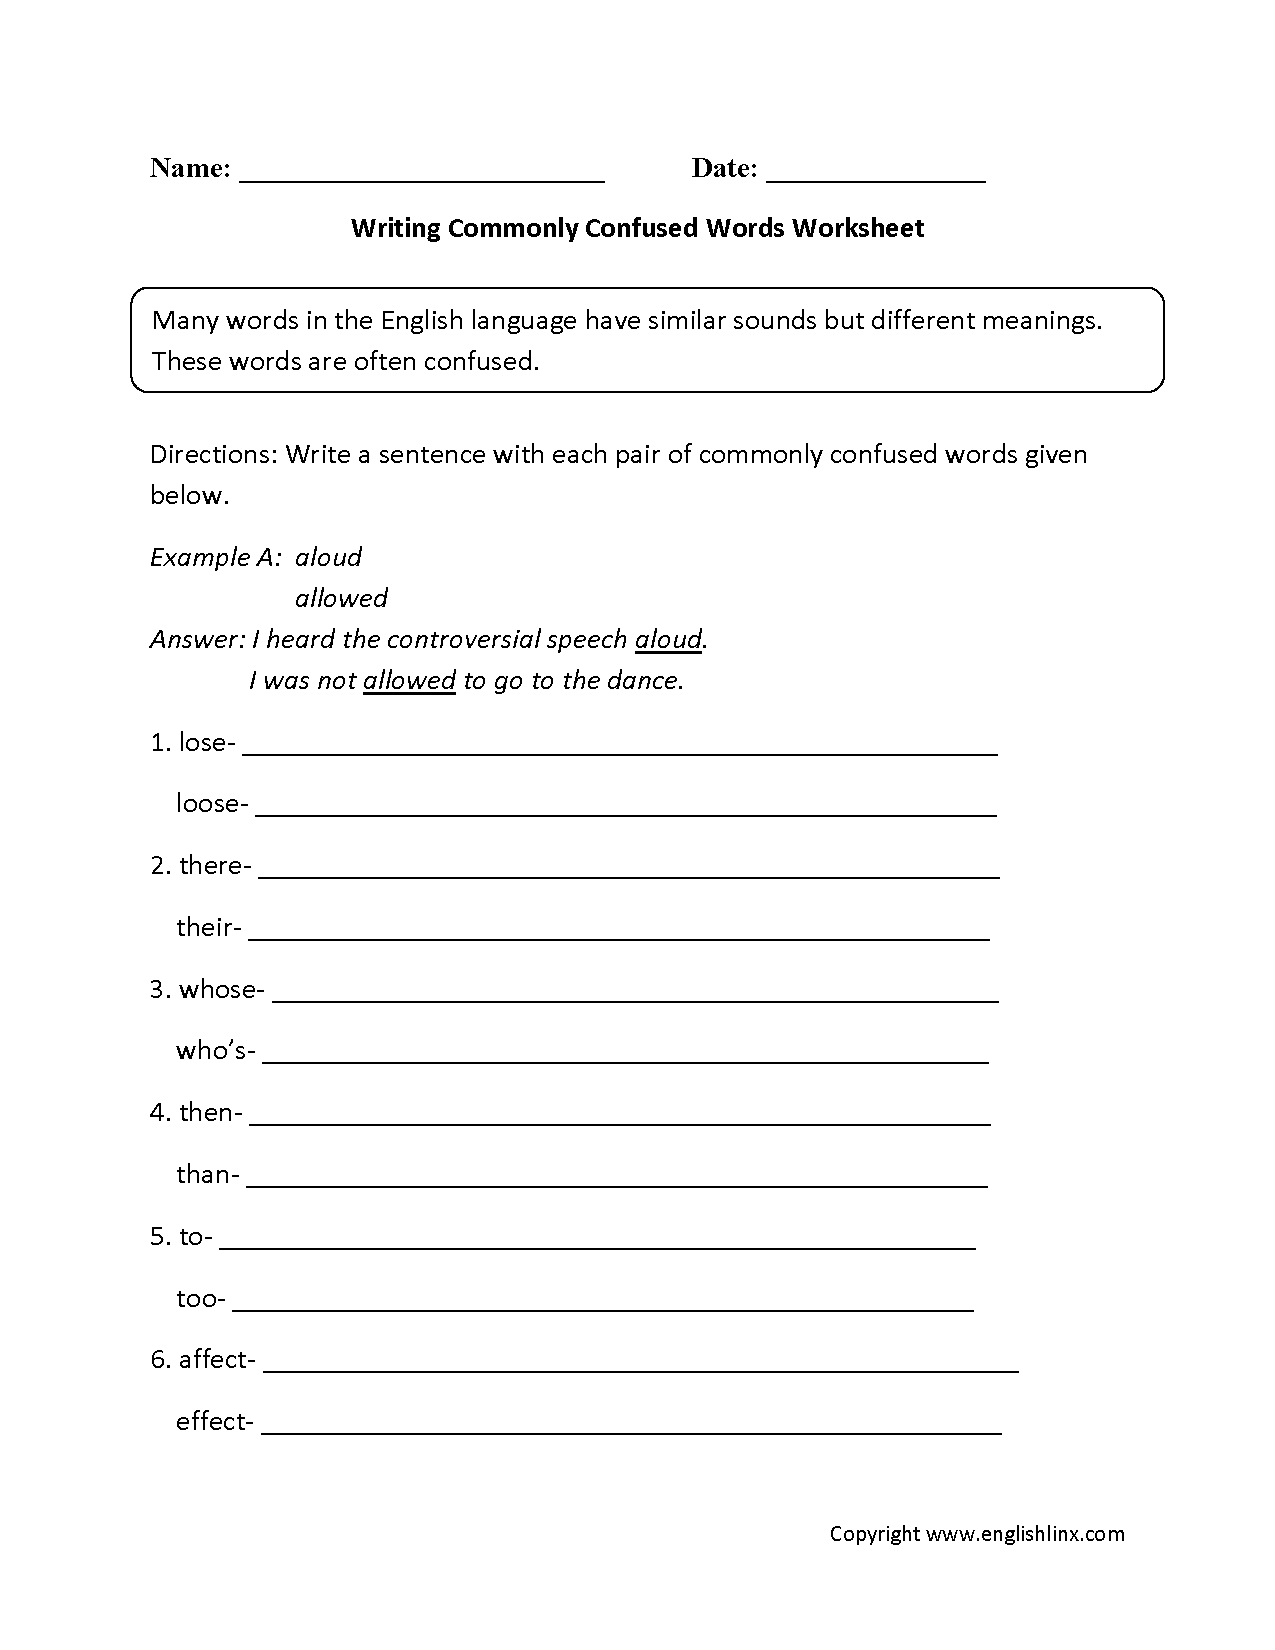 Writing Commonly Confused Words Worksheet